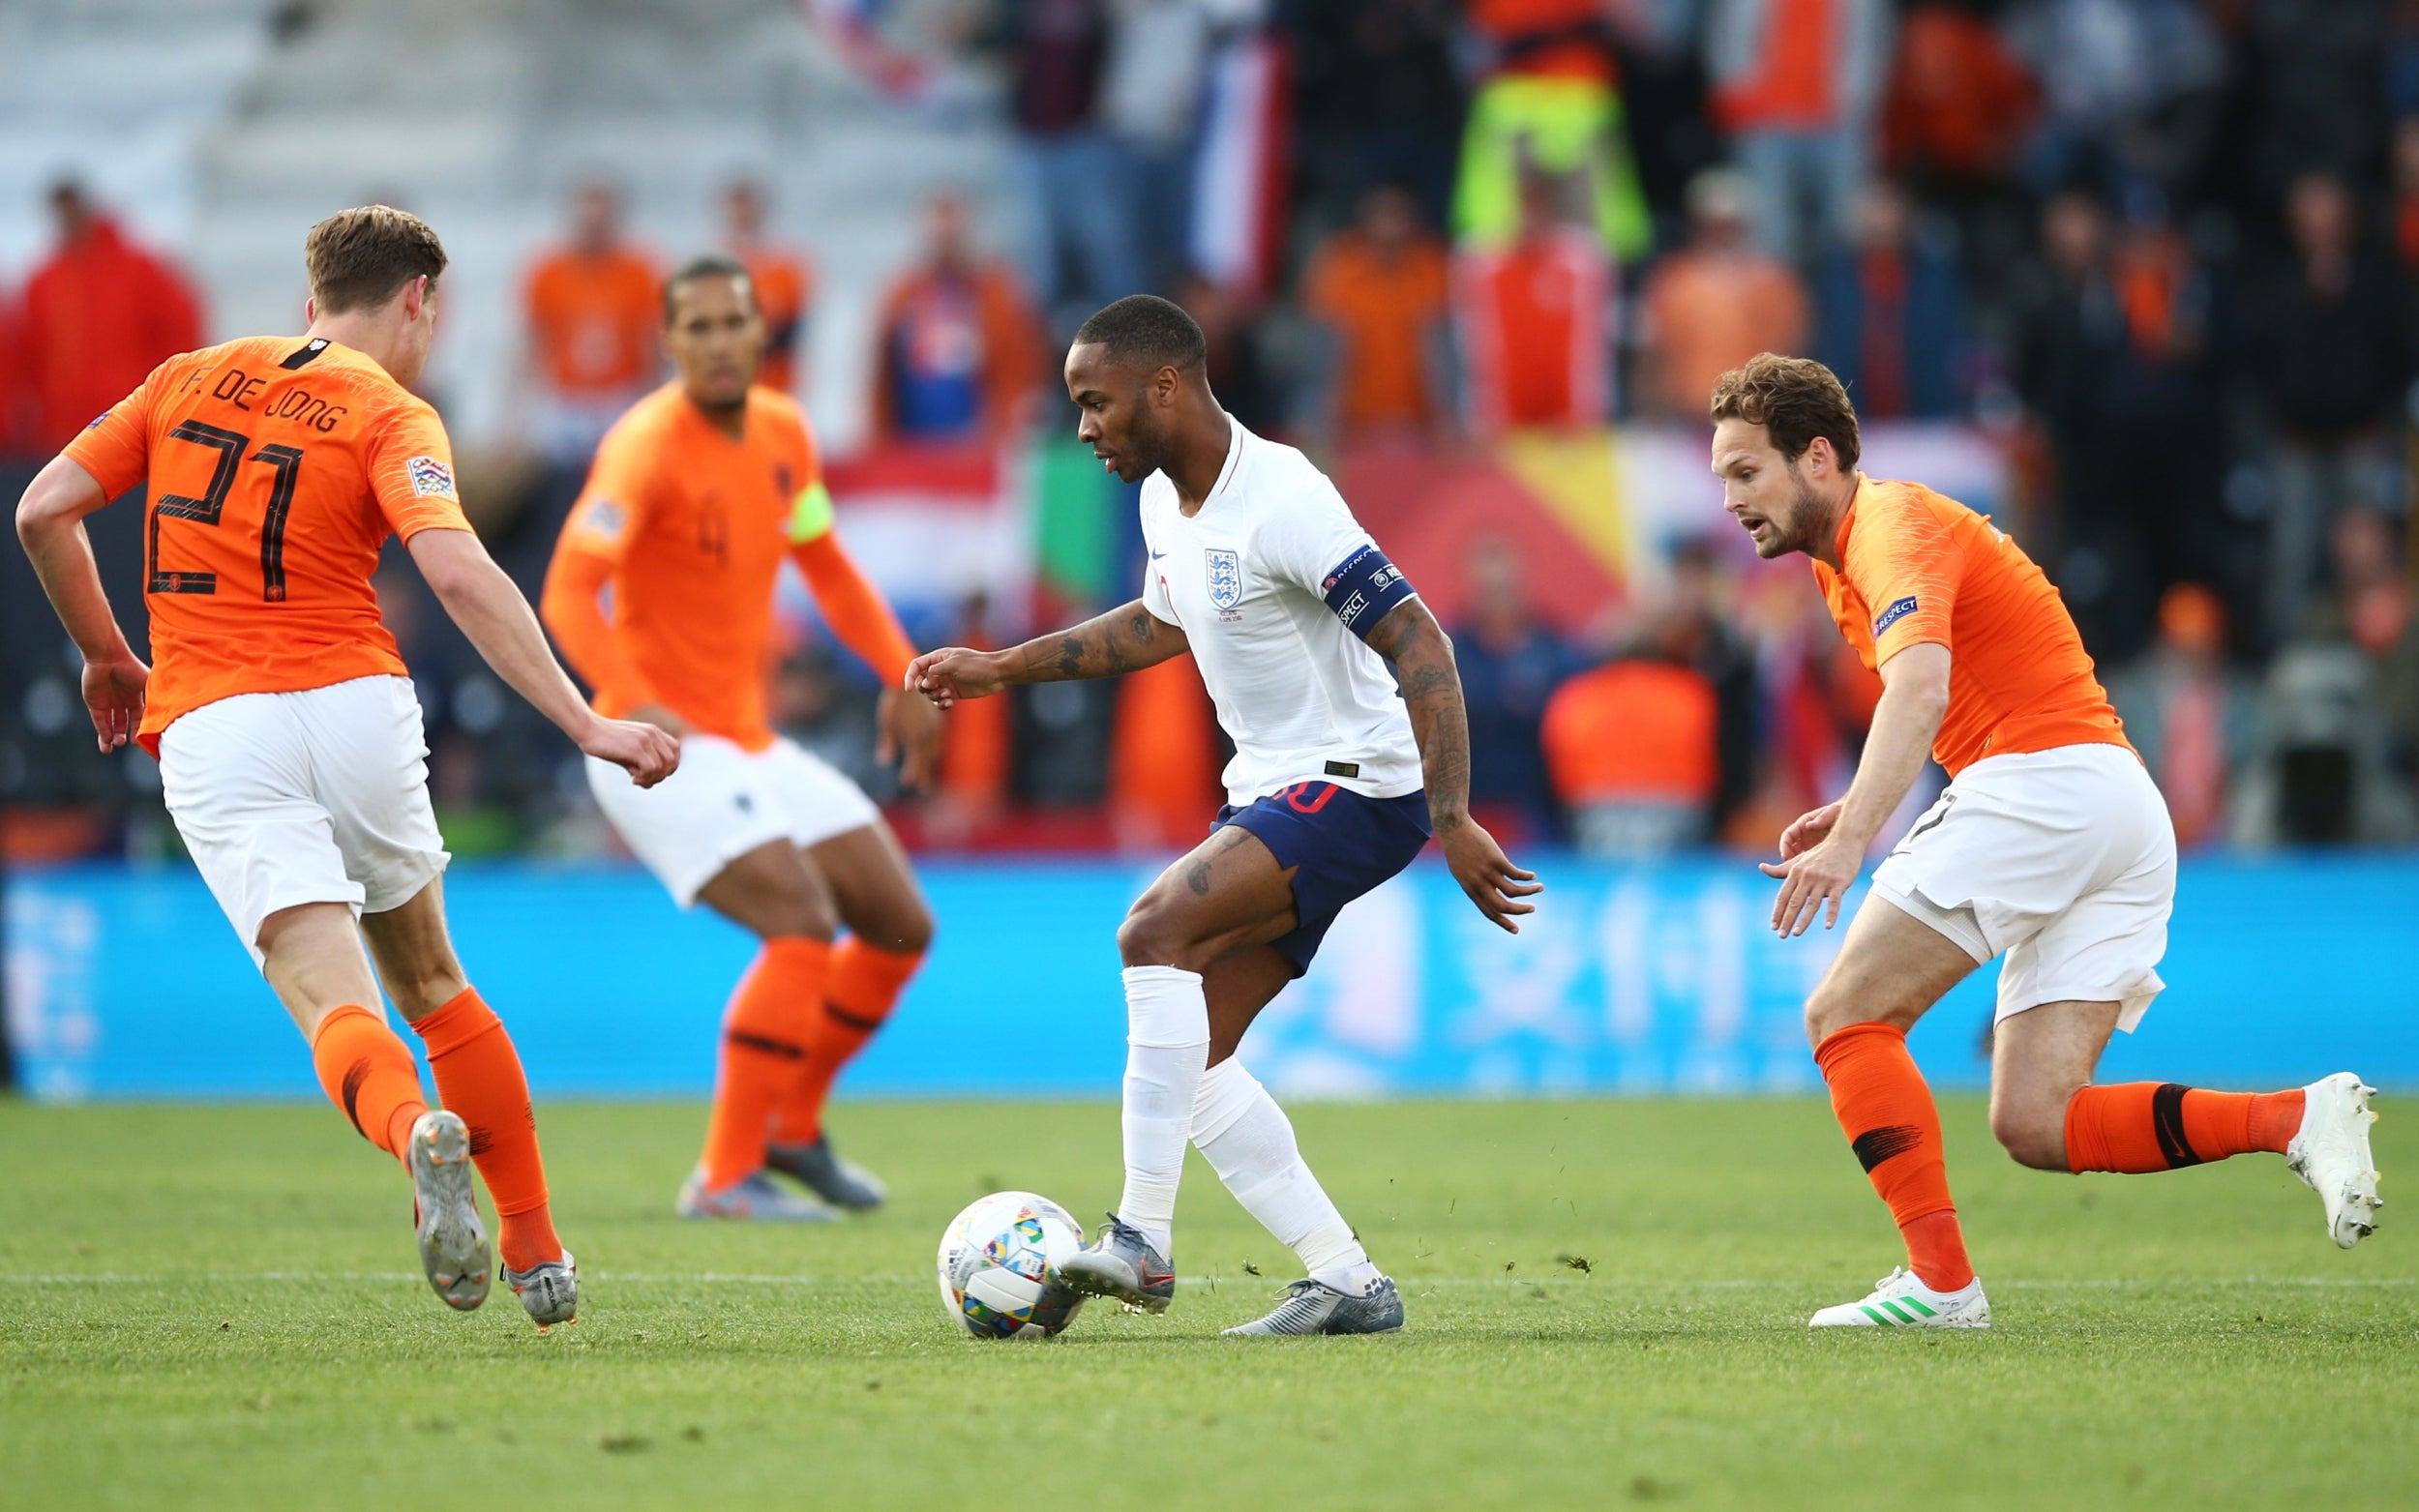 England Netherlands in the UEFA Nations League